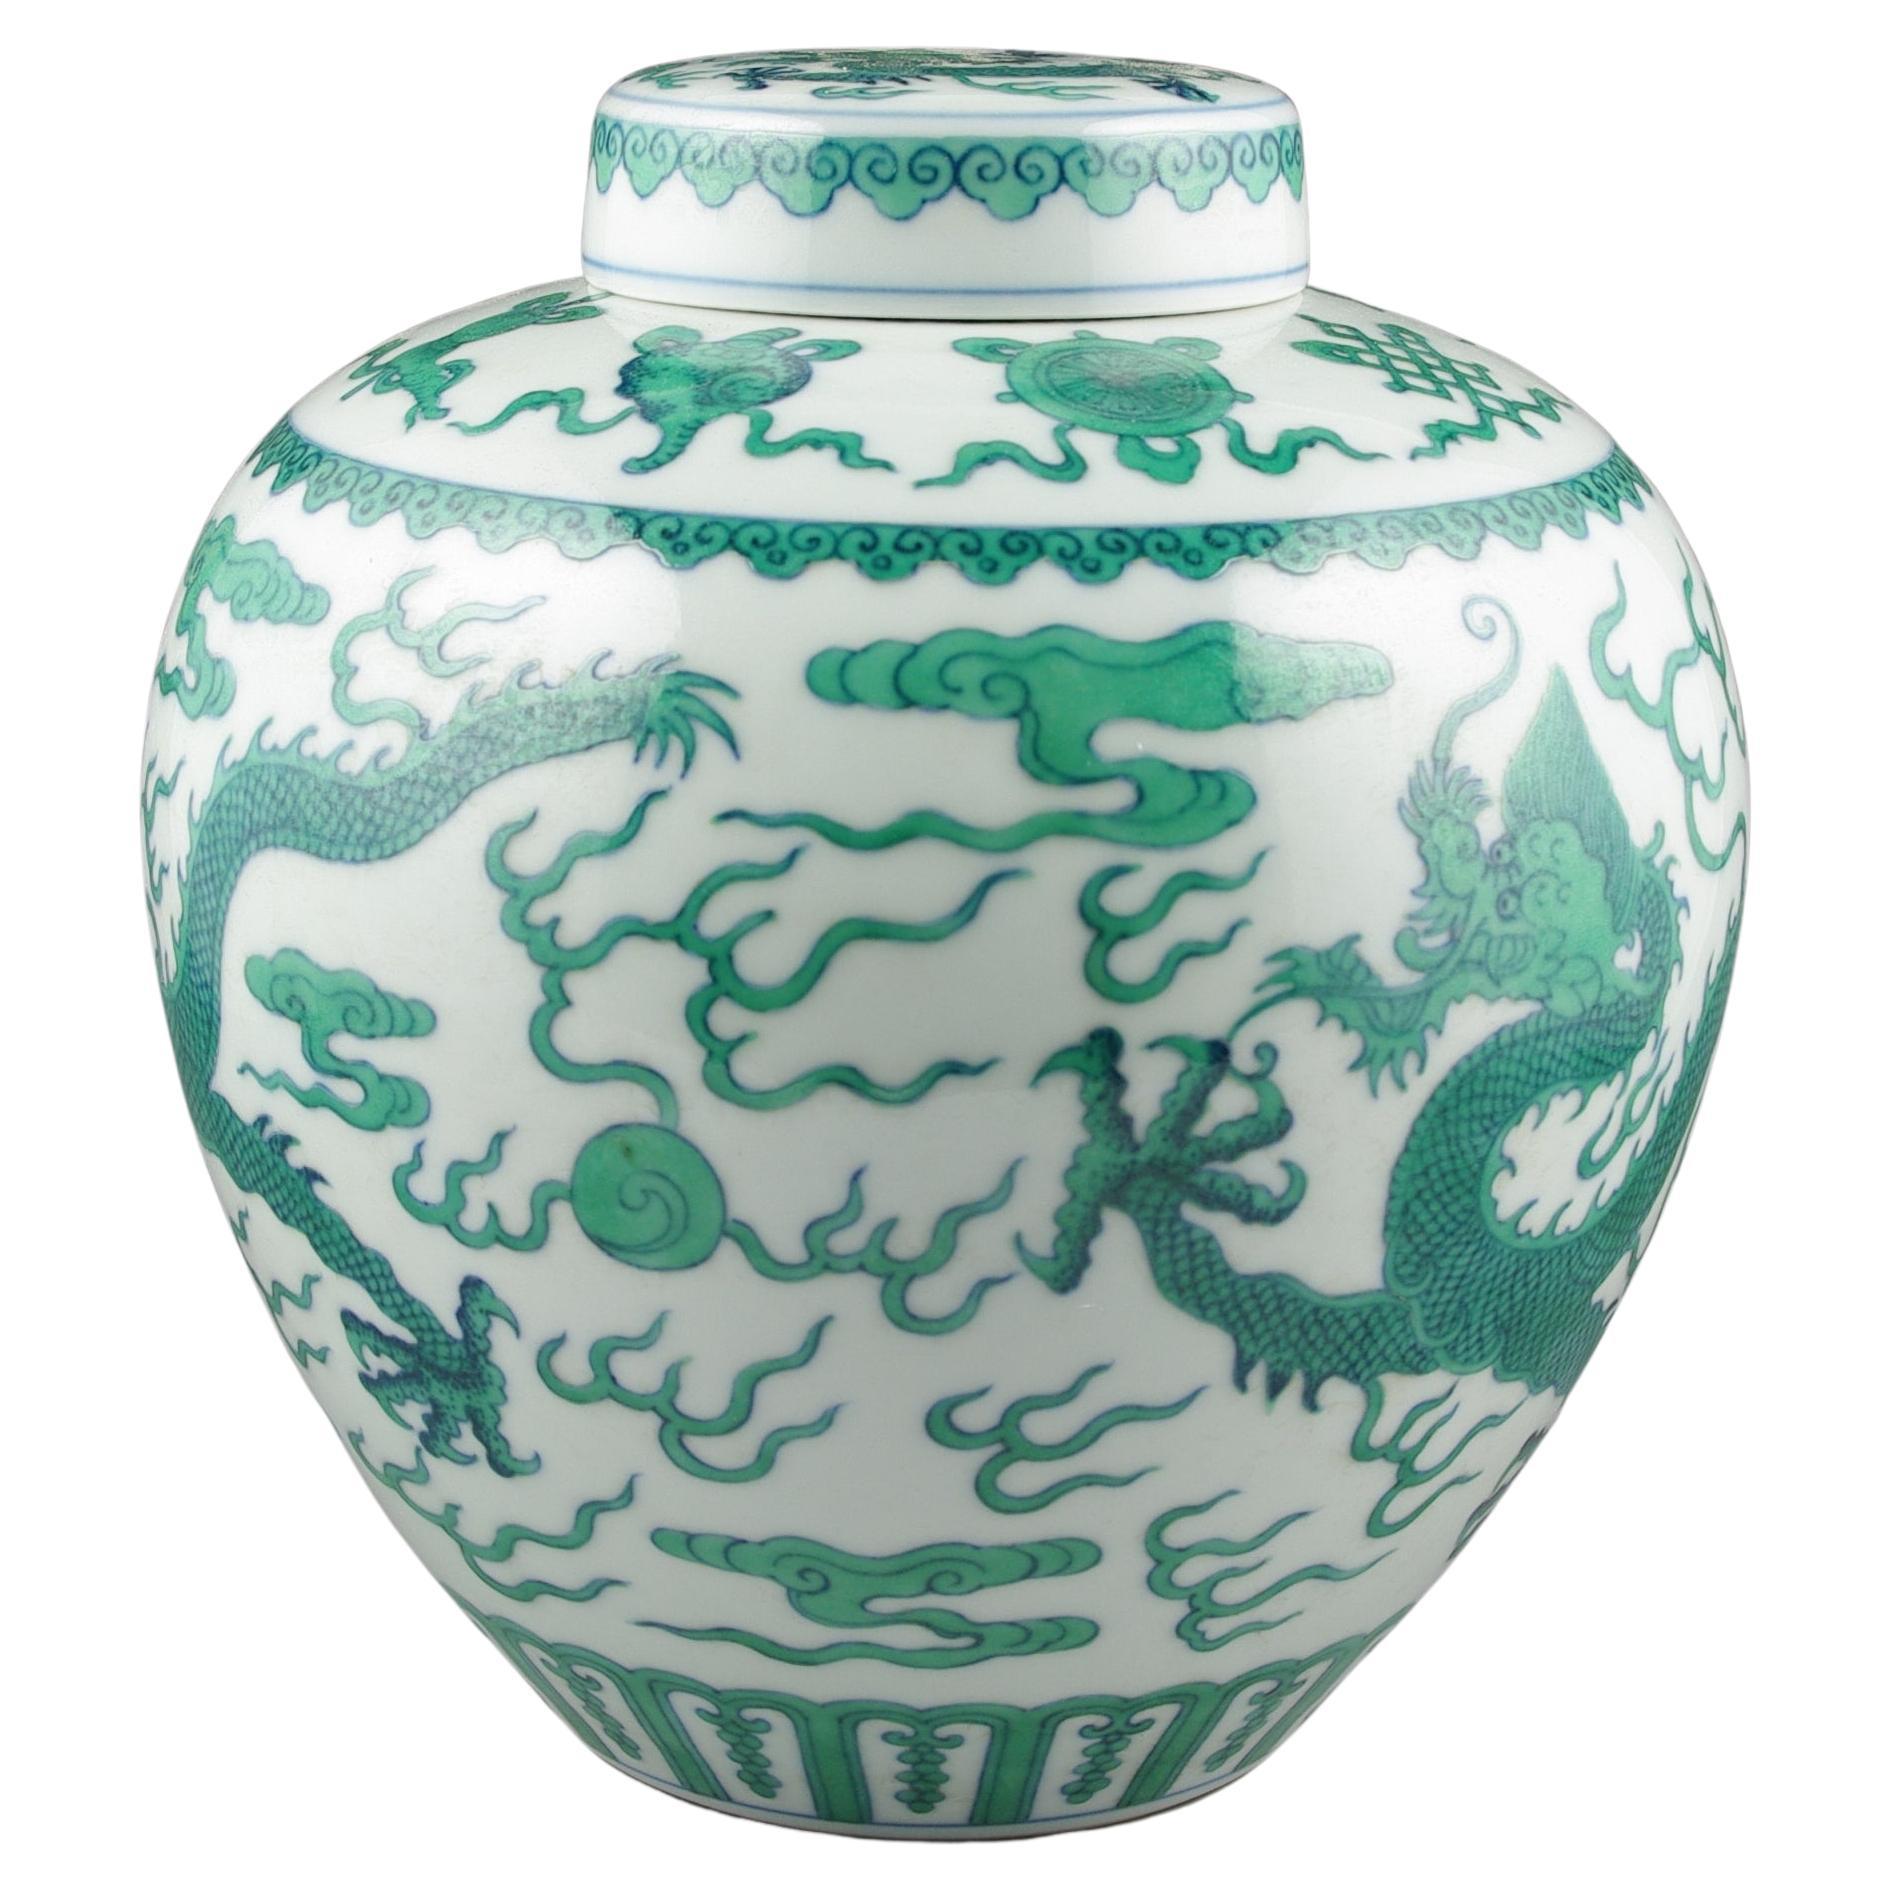 We are delighted to showcase this exquisite Chinese porcelain covered ginger jar, a piece that embodies the pinnacle of craftsmanship and artistic excellence. The jar captivates the beholder with its vibrant depiction of a slithering scaly dragon in